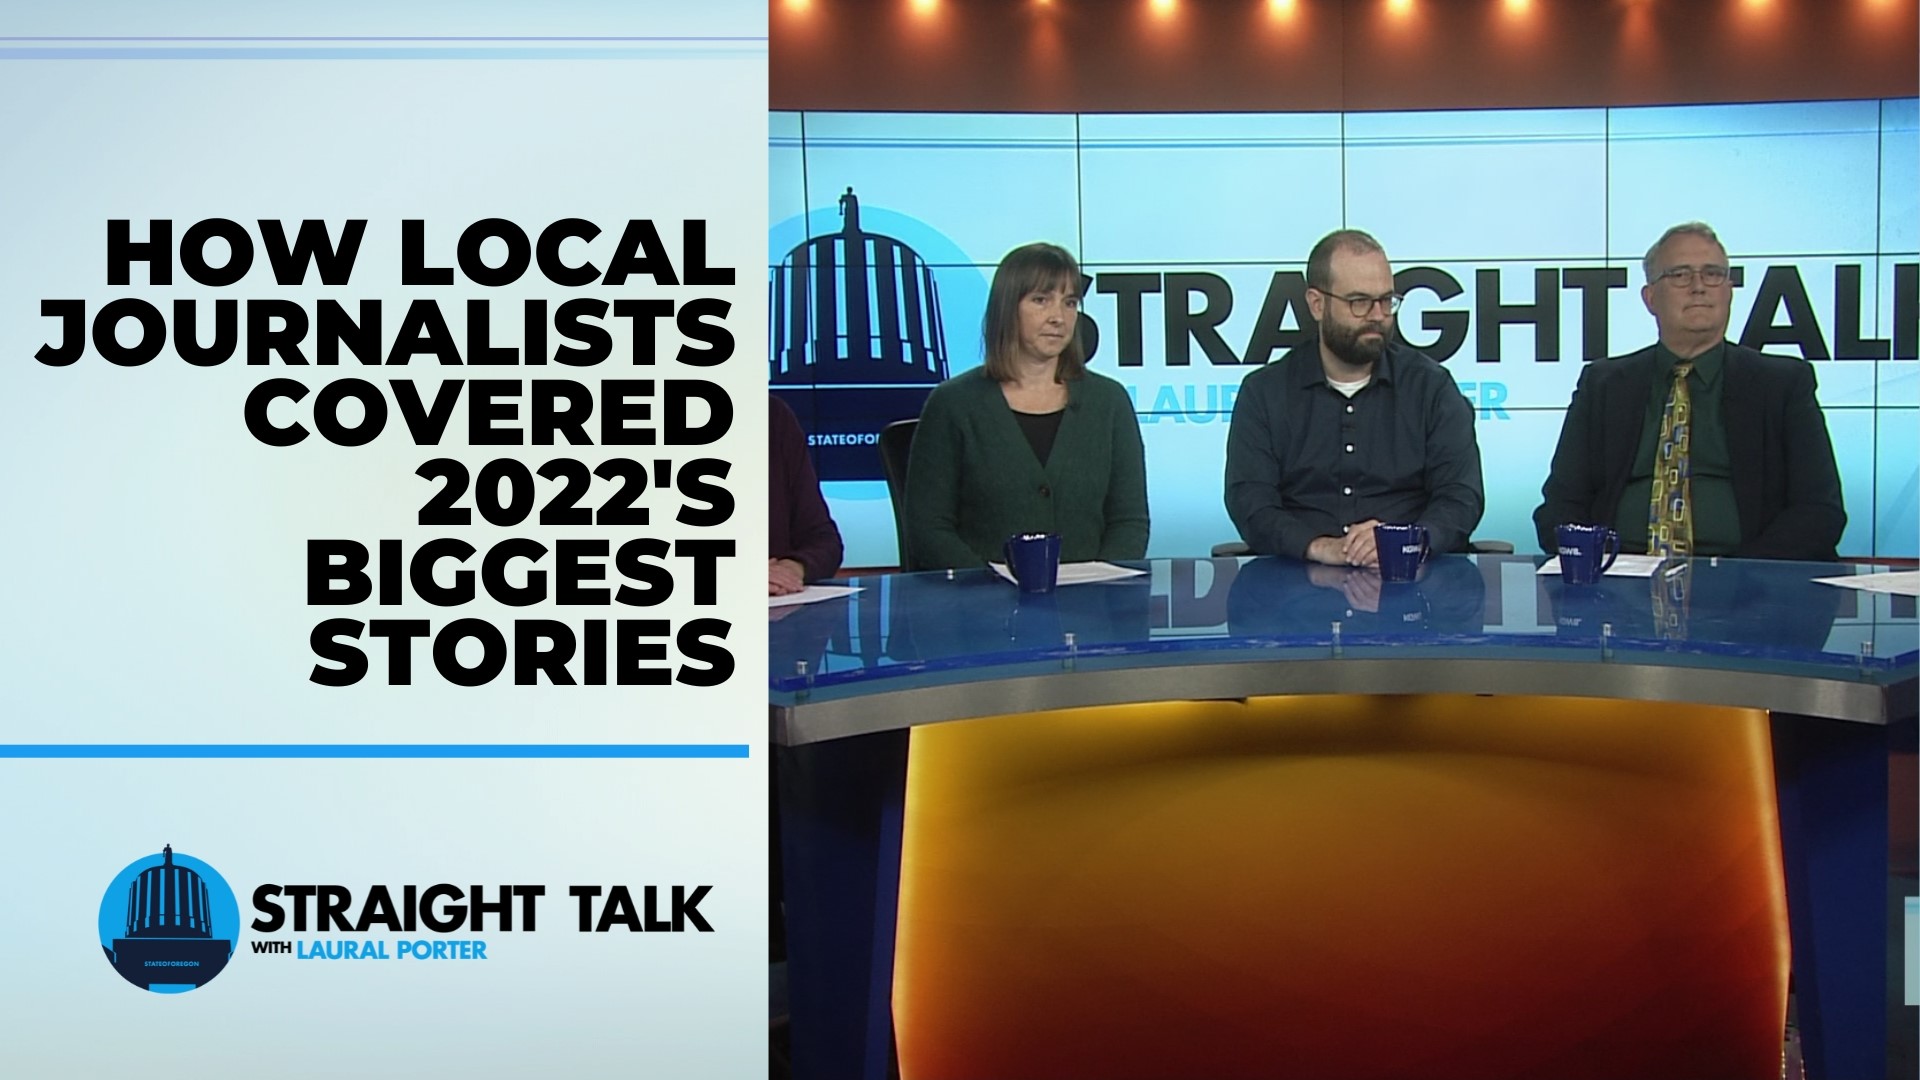 Editors from Portland and Vancouver-area news organizations joined KGW to discuss the biggest stories from 2022